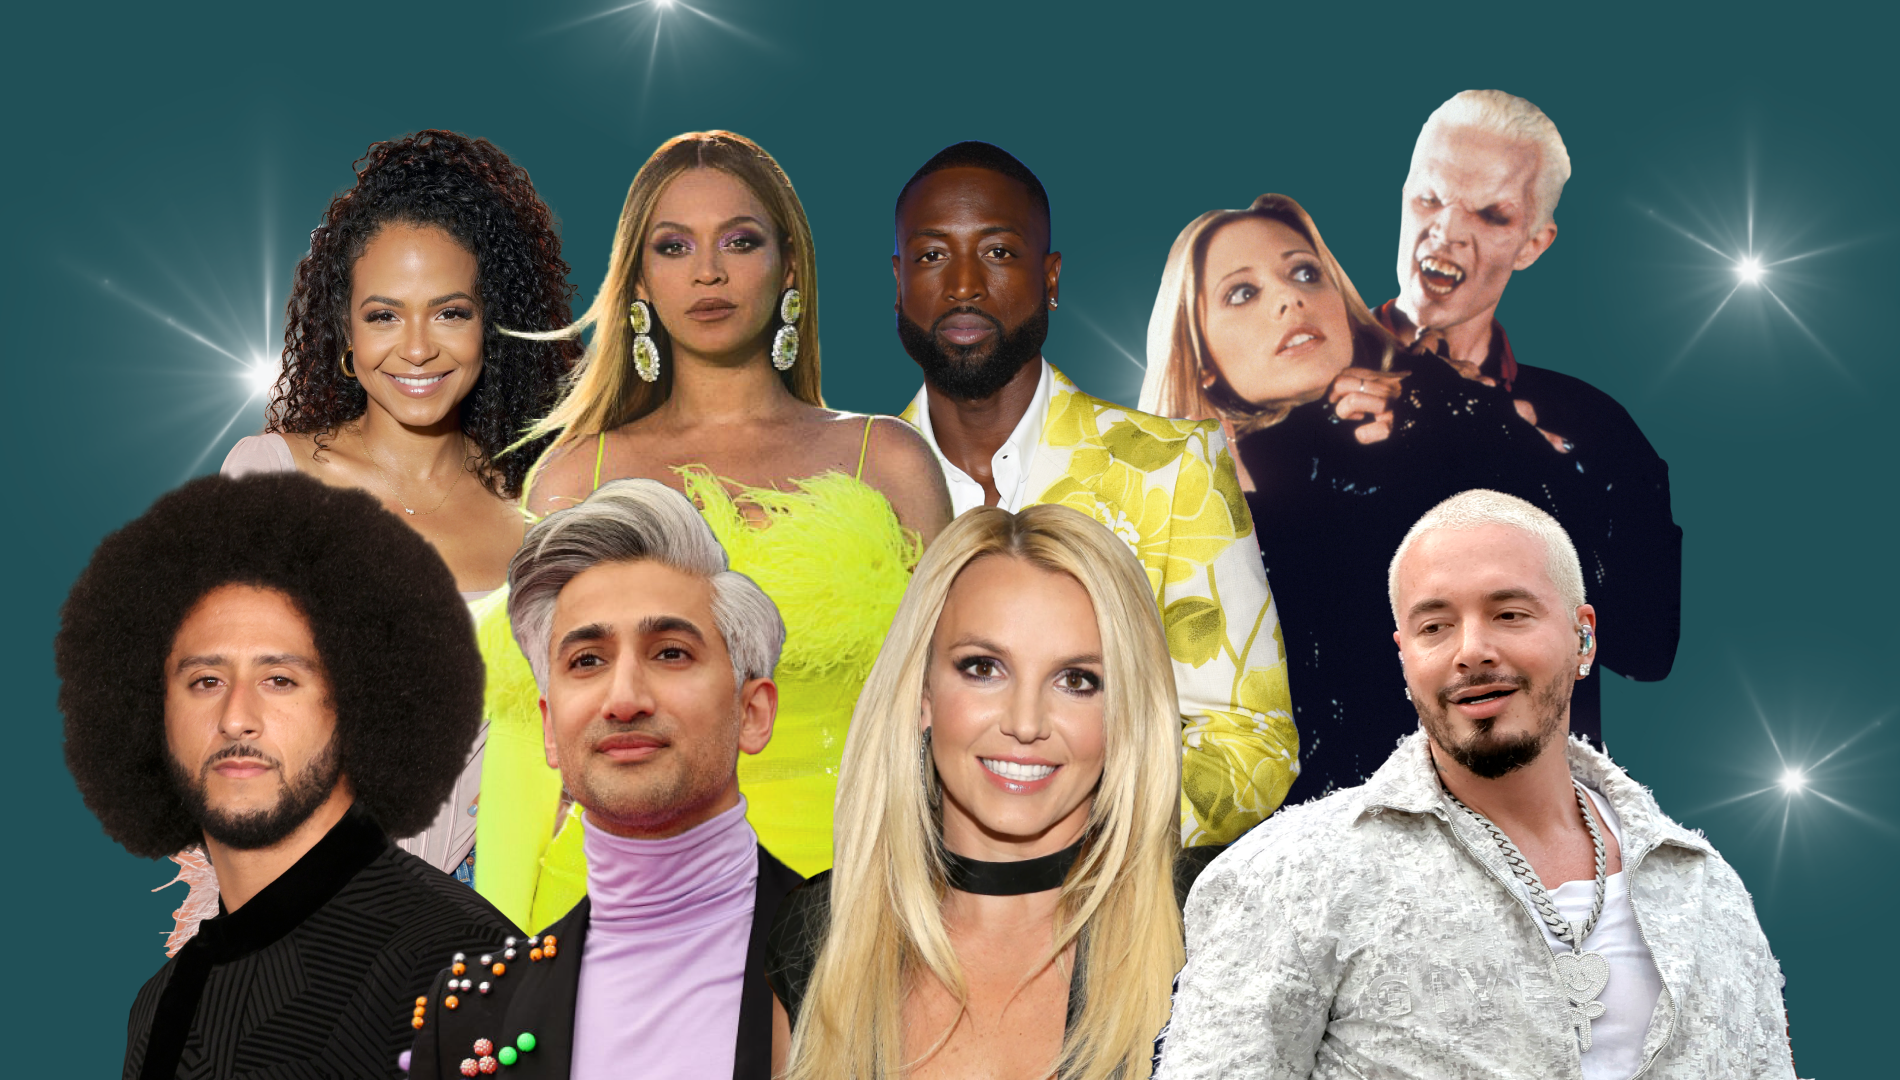 Promo image for Pop Cultured with theSkimm September 27, 2022 featuring a celebrity collage of Beyonce, Britney Spears, Colin Kapernick, and more.